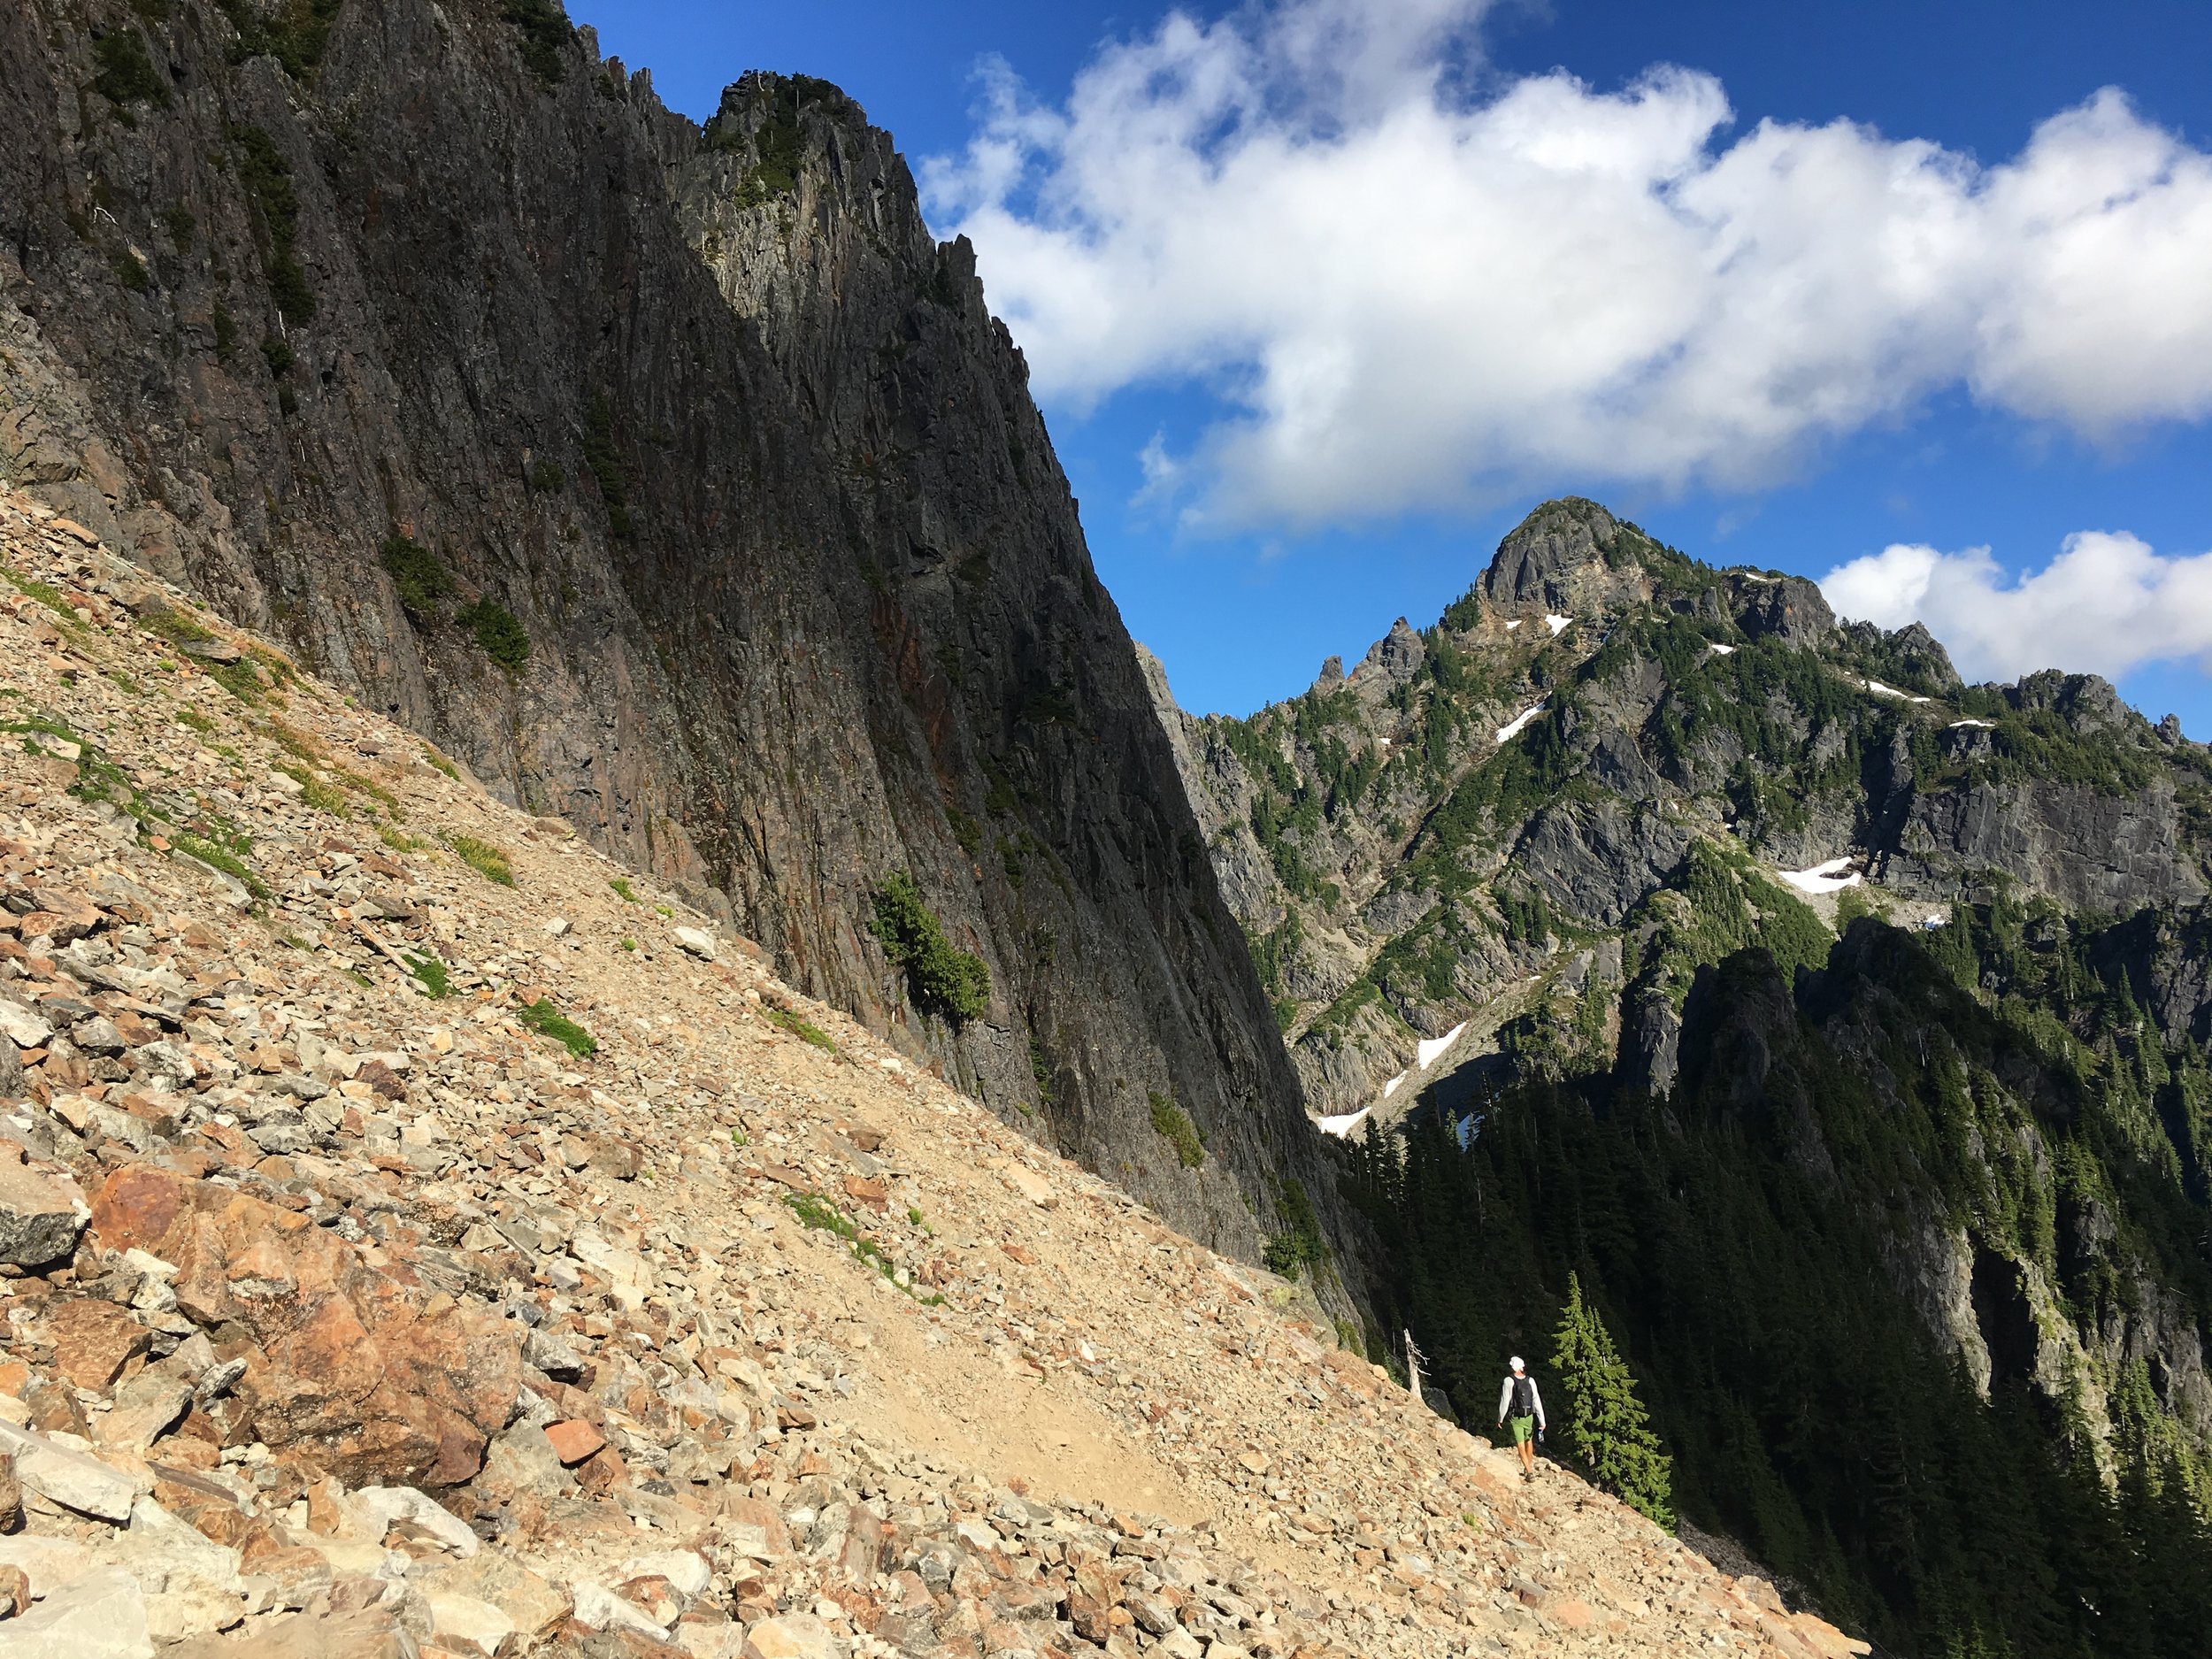 Pictured lower right, David, hiking steep canyons in the Cascade mountains, 2018.